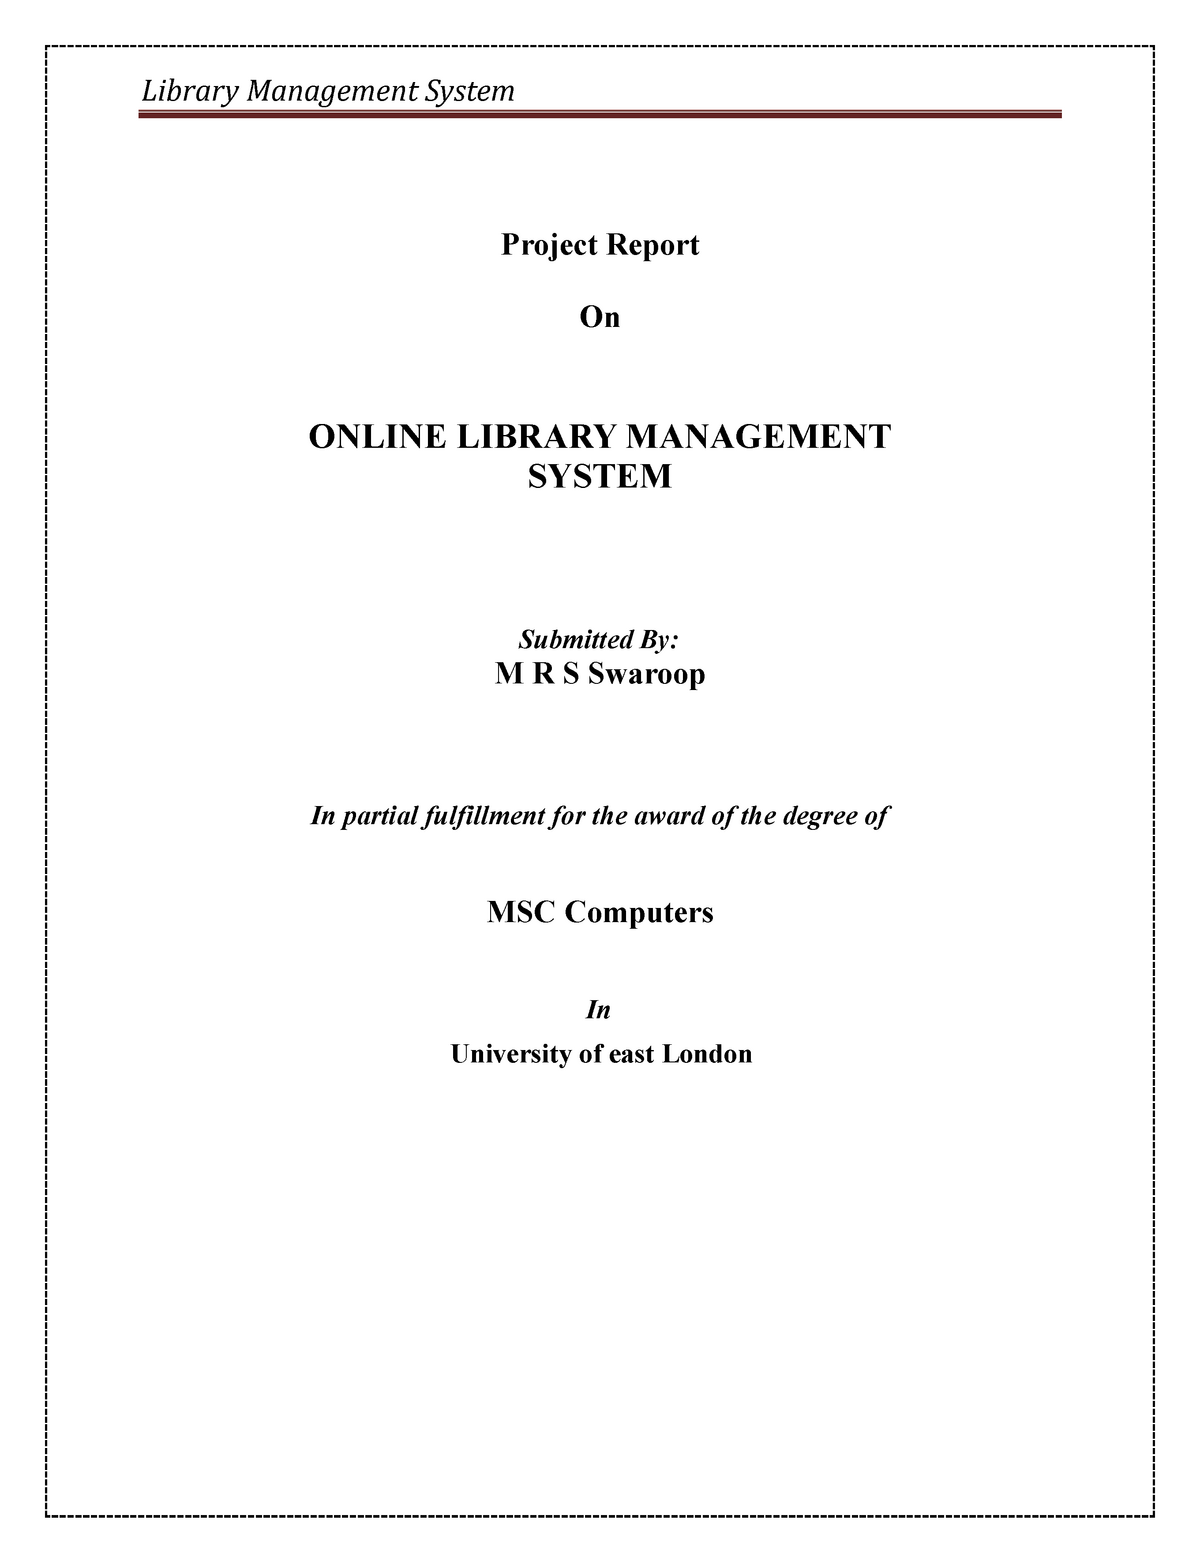 research papers on library management system